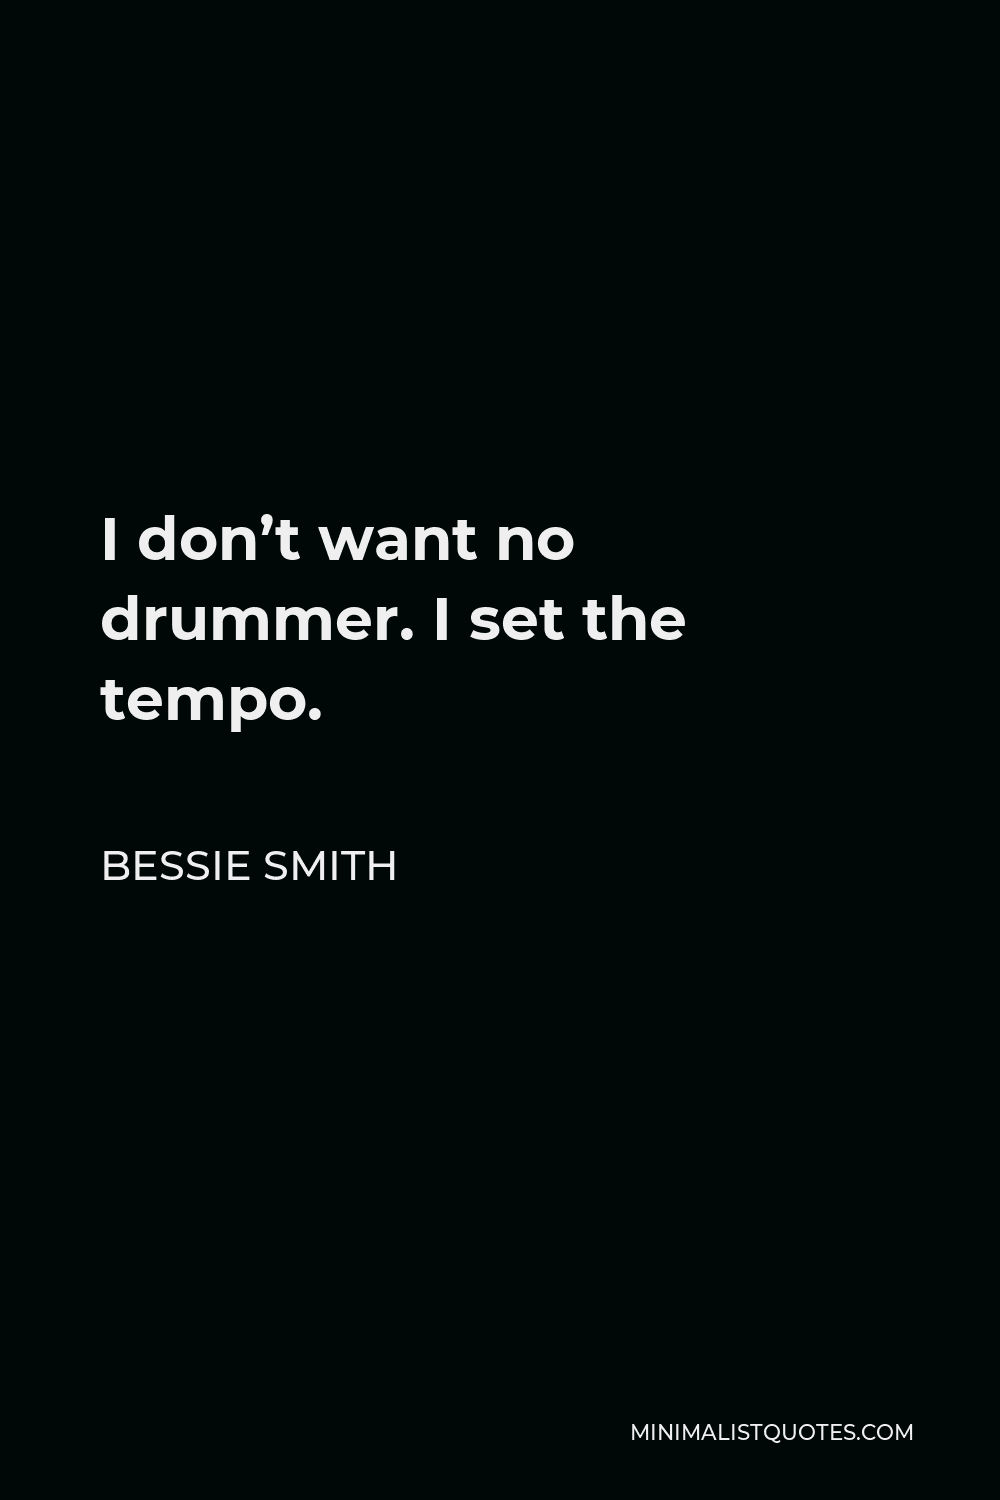 Bessie Smith Quote - I don’t want no drummer. I set the tempo.